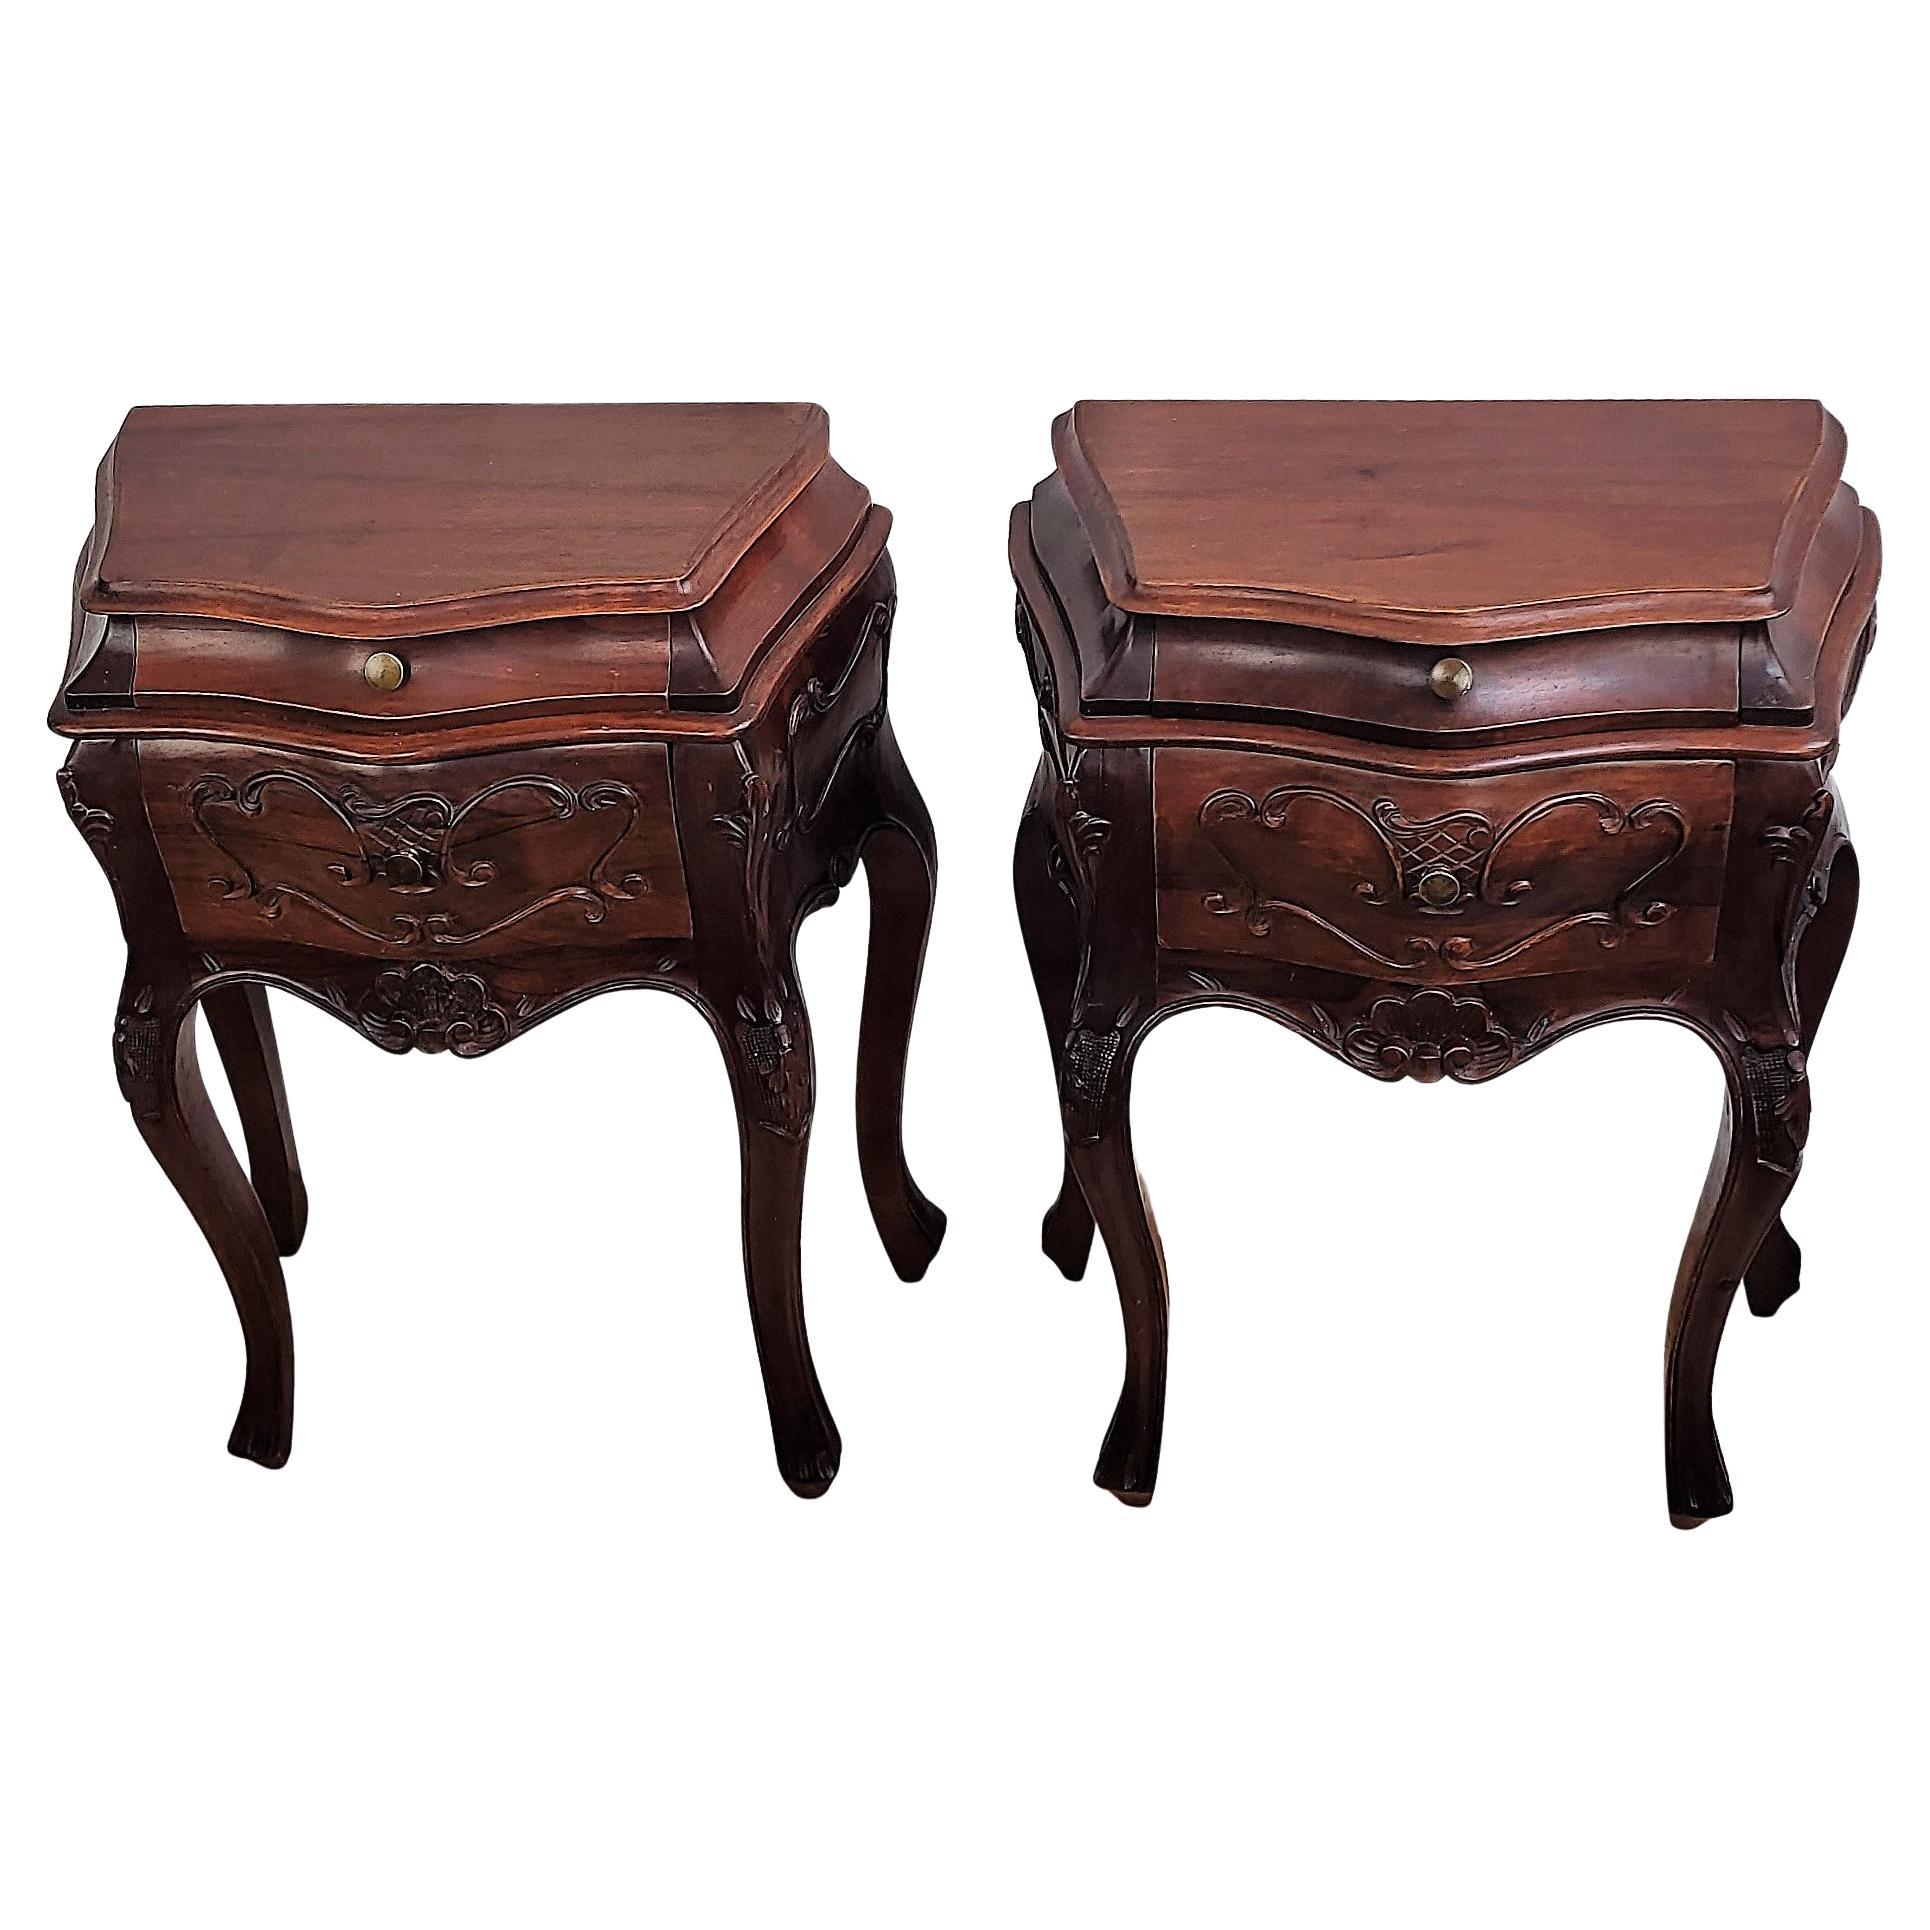 Pair of French Nightstands with Two Drawers and Carbriole Legs